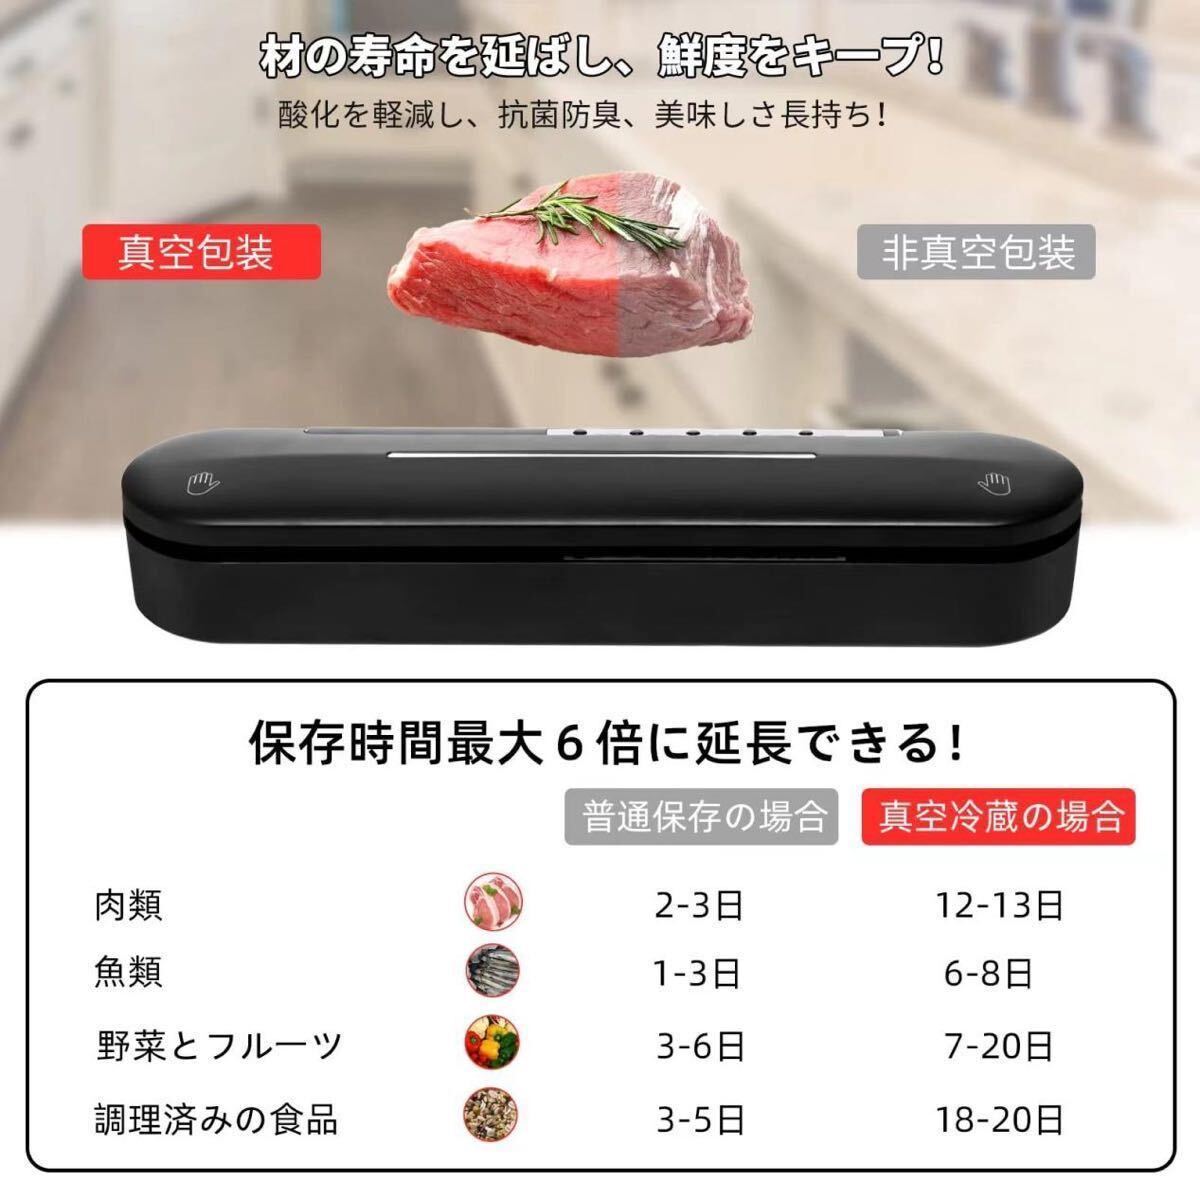  vacuum pack vessel food sealing coat vacuum packaging machine .. both for compilation water tank built-in home use business use freshness long-lasting vacuum cooking freshness long-lasting food preservation Japanese instructions 